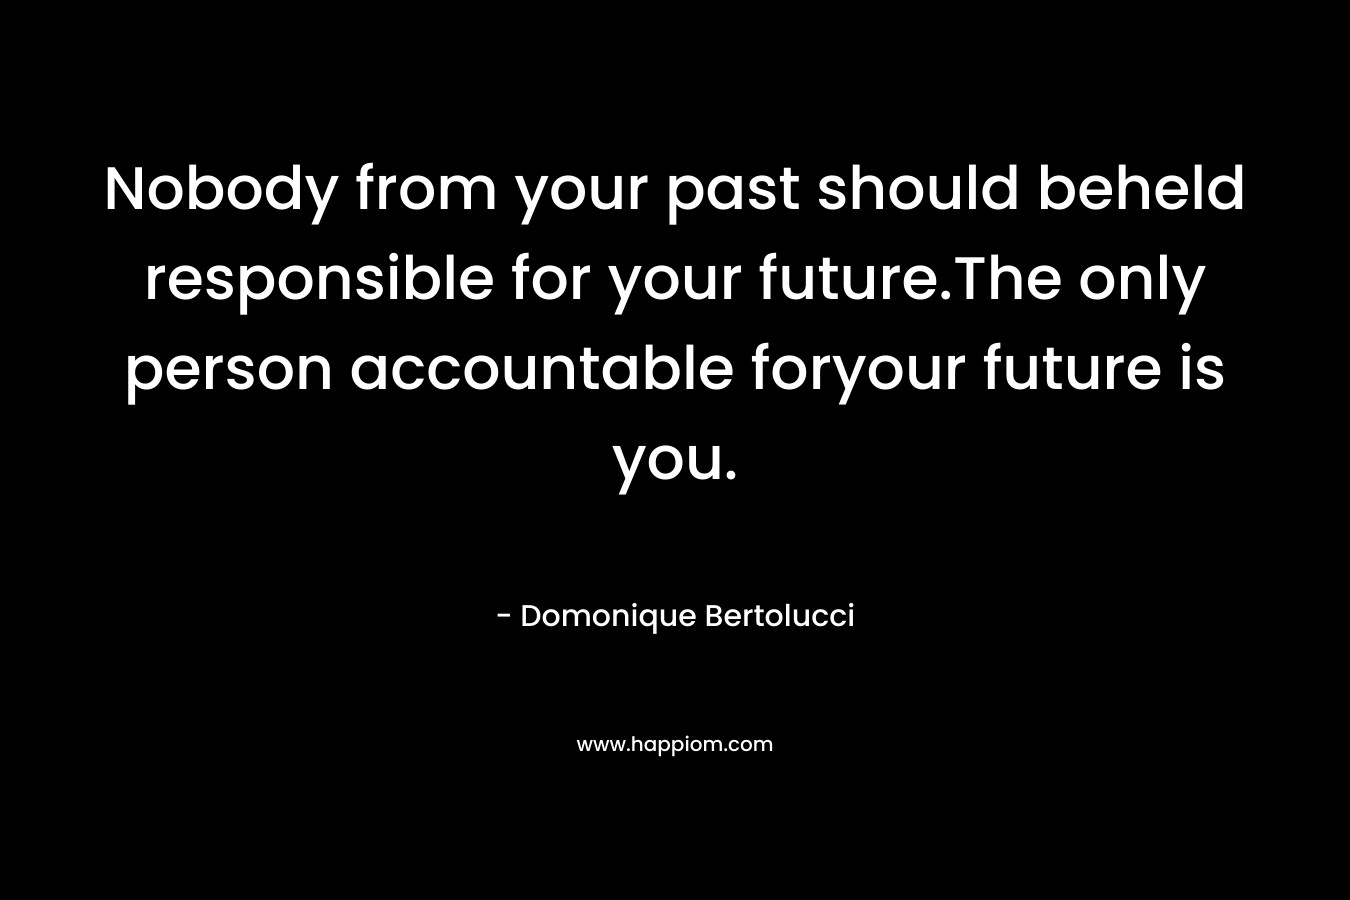 Nobody from your past should beheld responsible for your future.The only person accountable foryour future is you.